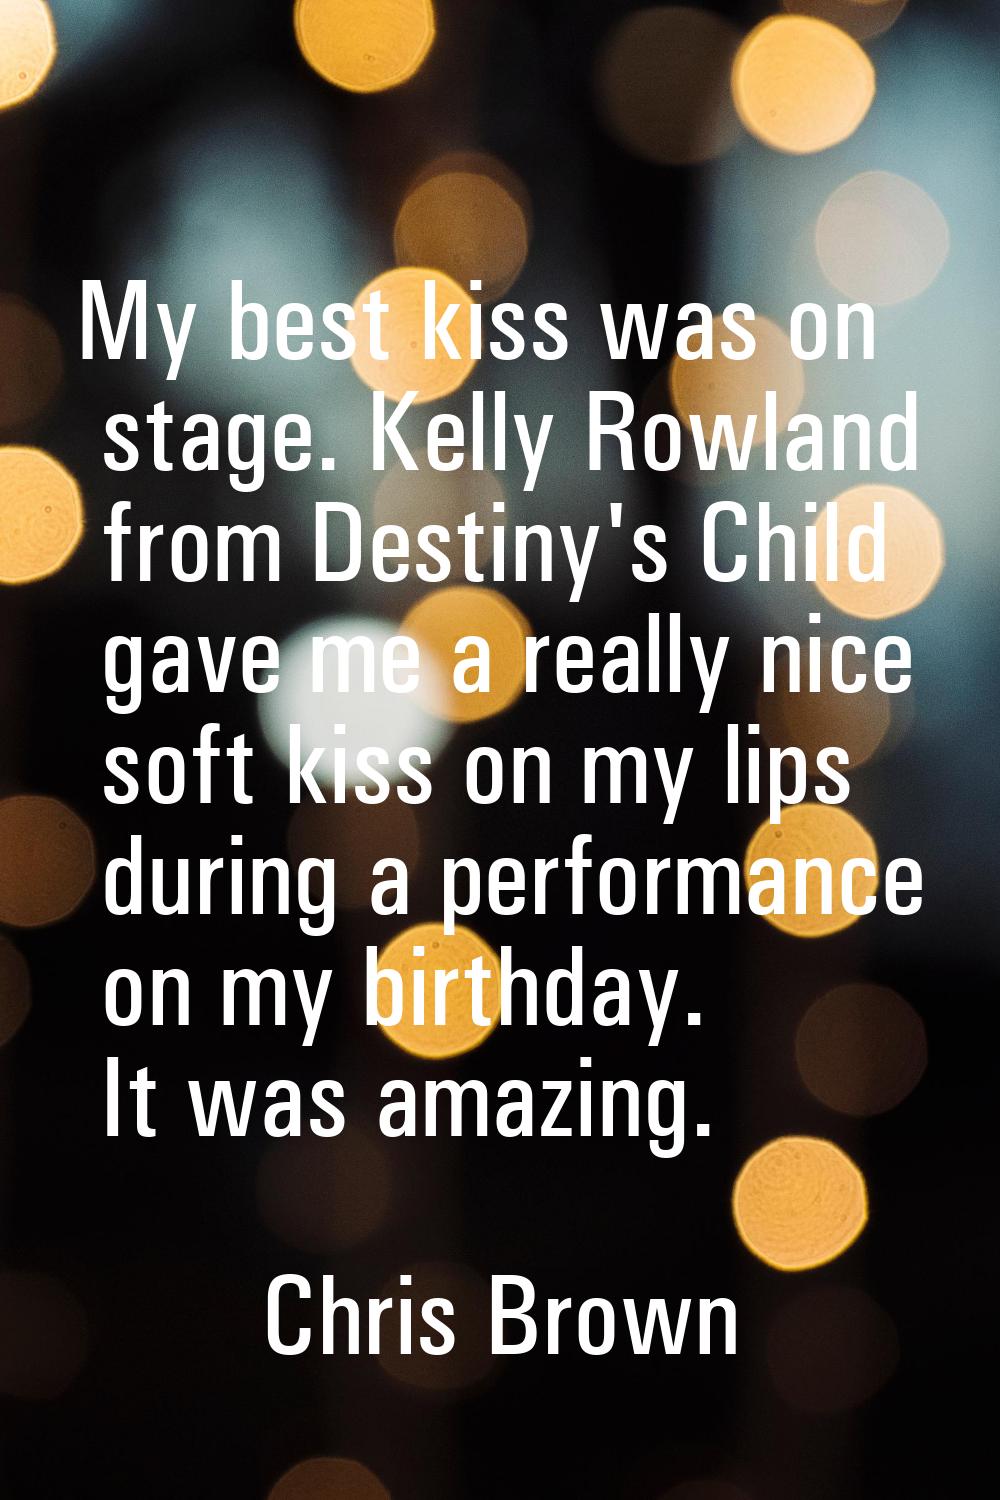 My best kiss was on stage. Kelly Rowland from Destiny's Child gave me a really nice soft kiss on my